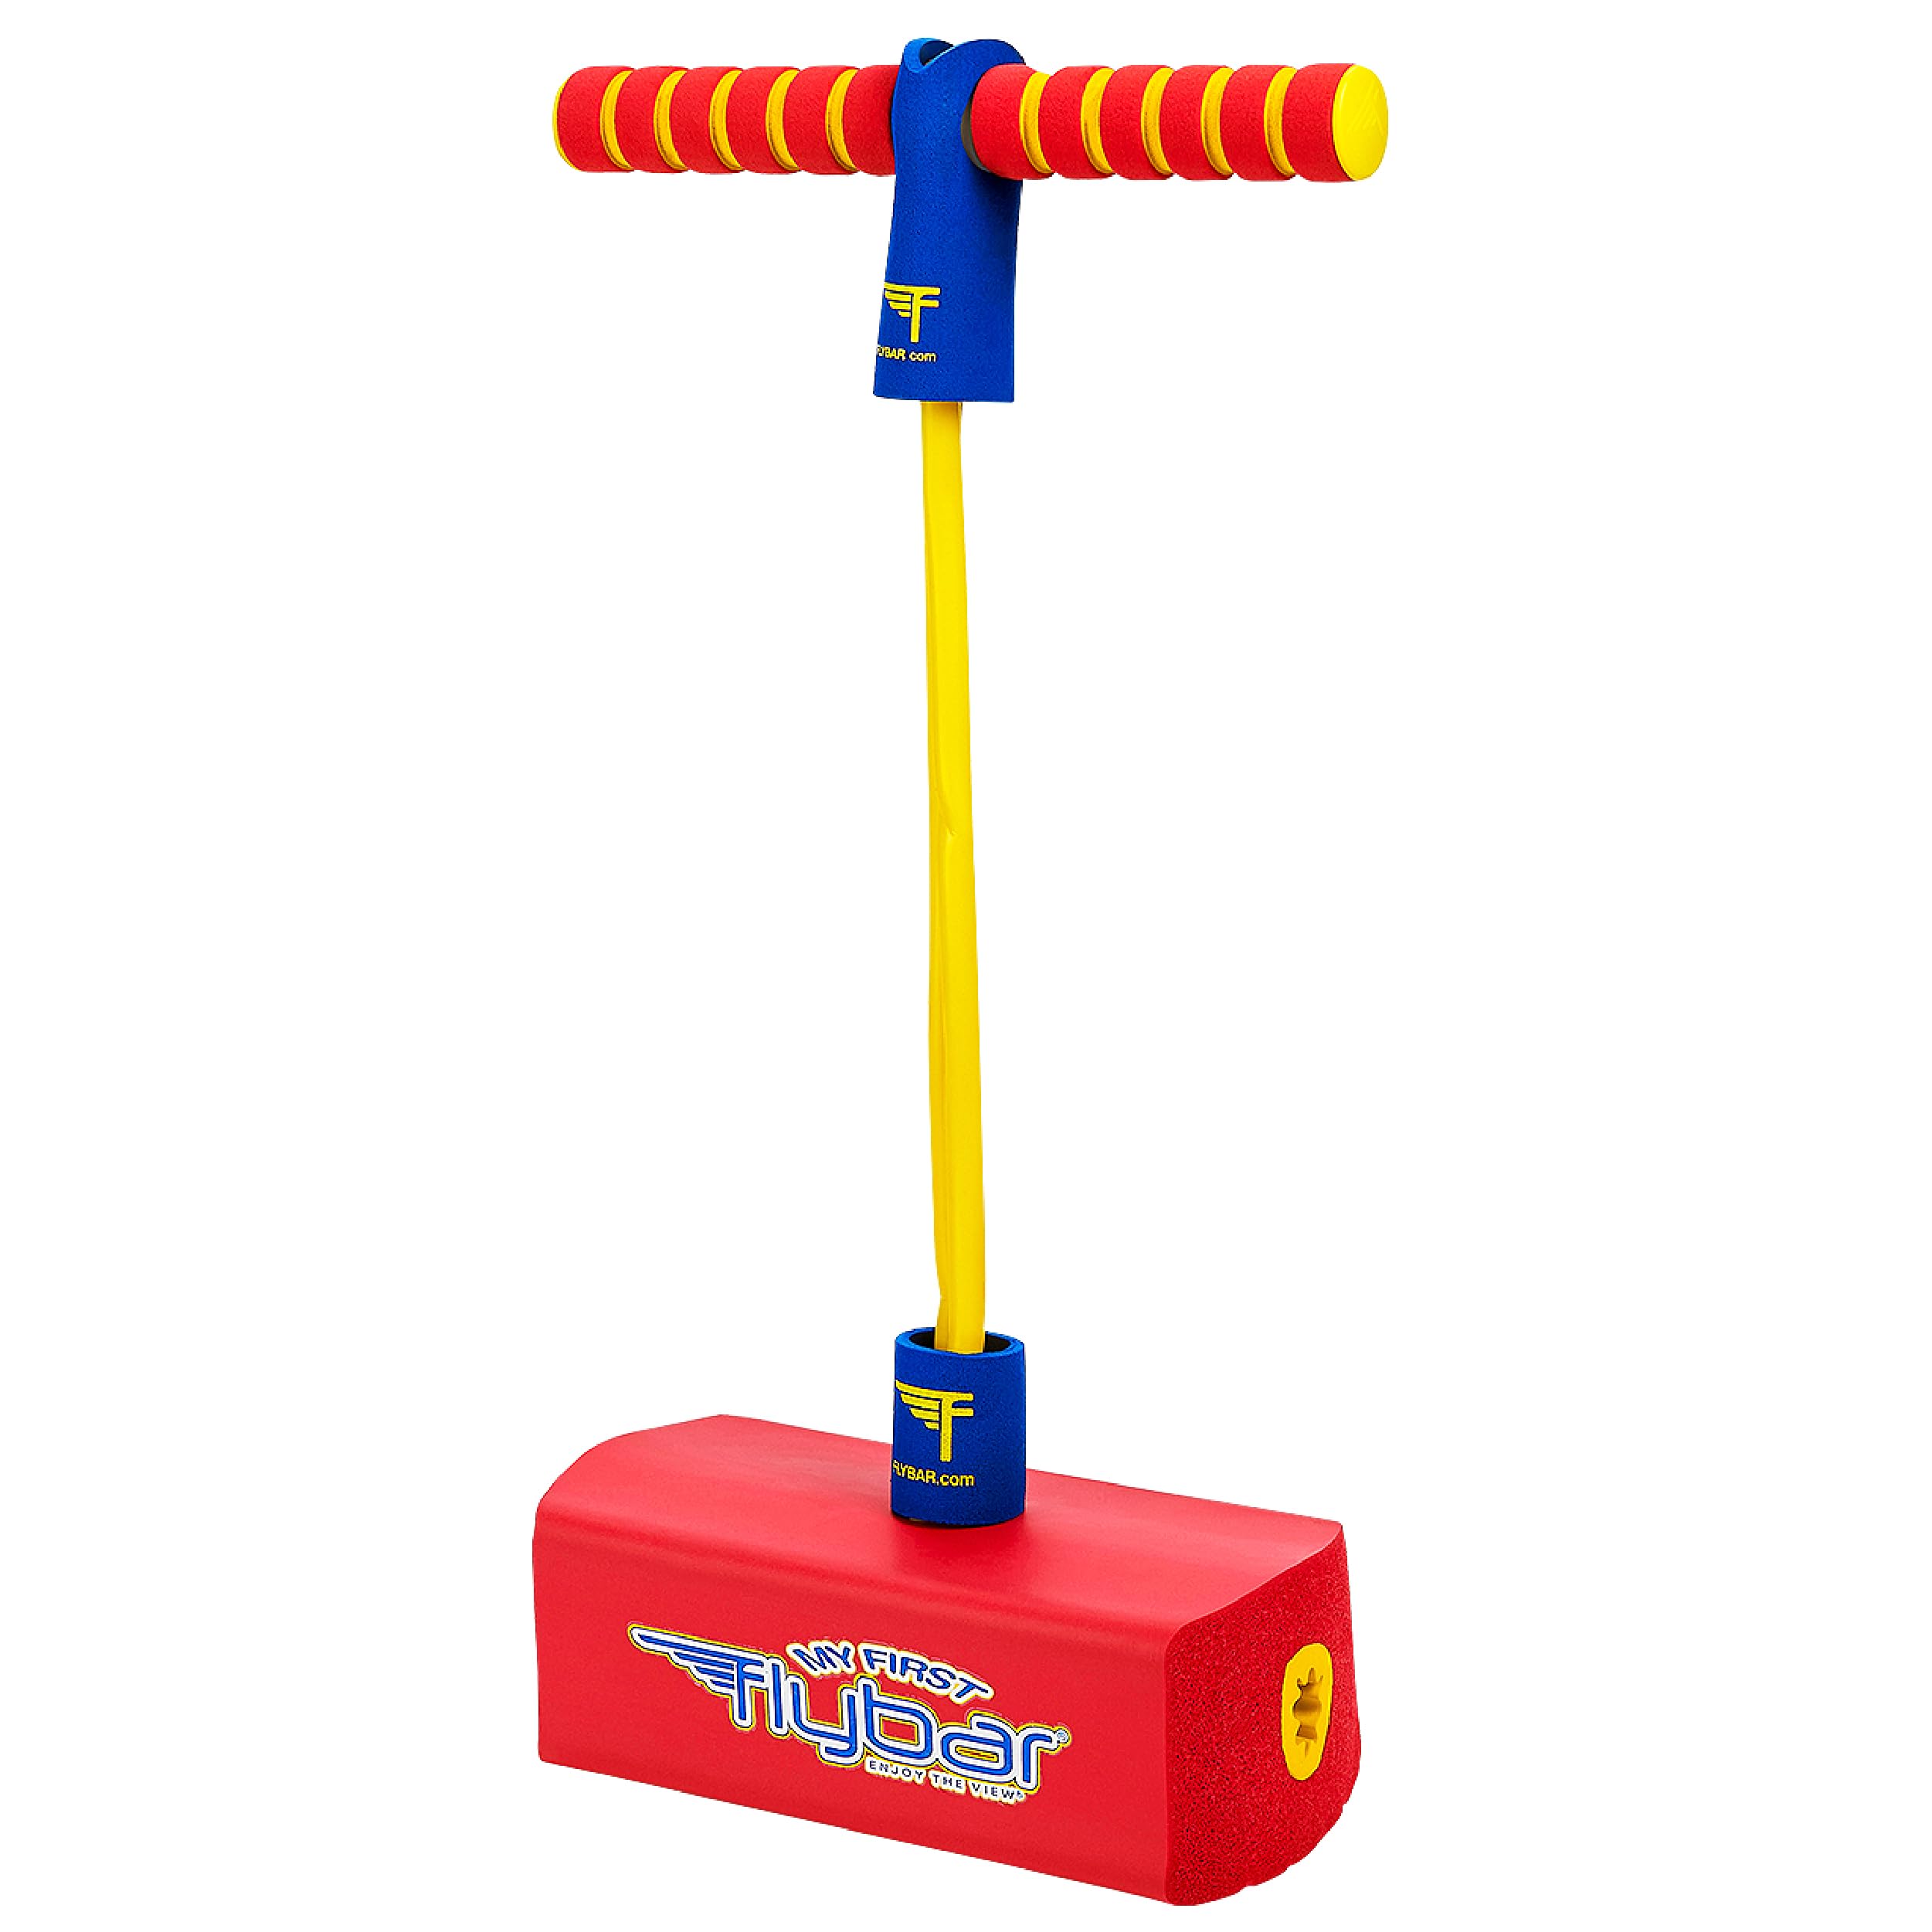 Flybar My First Foam Pogo Stick Jumper: Red $7.77, Blue $9.89 + Free Shipping w/ Prime or on $35+